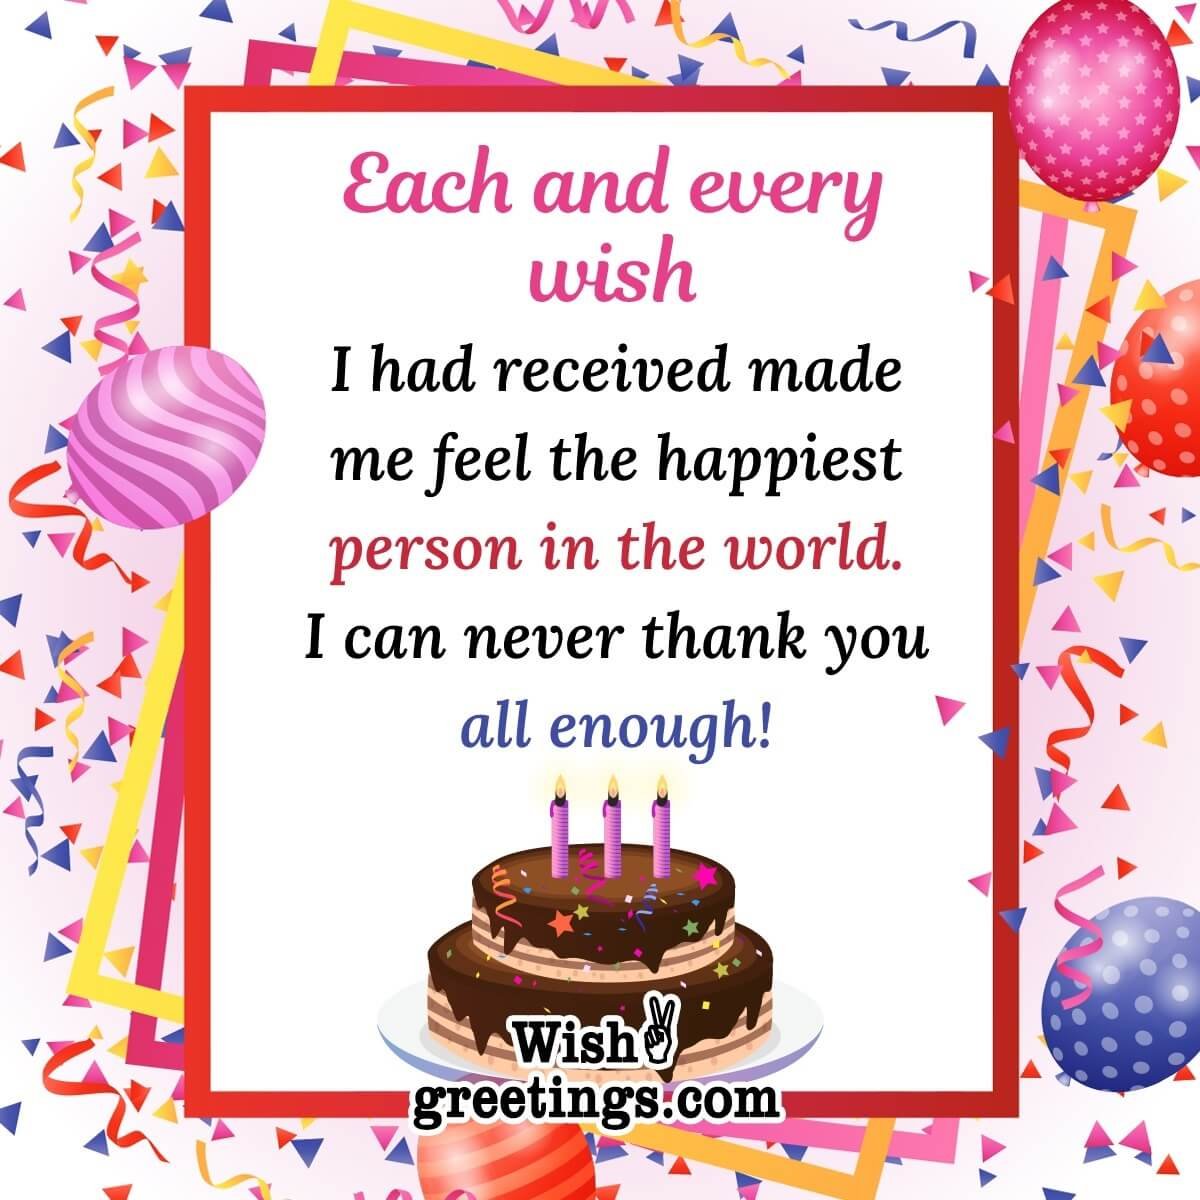 Thank You for Birthday Wishes on Facebook - Wish Greetings